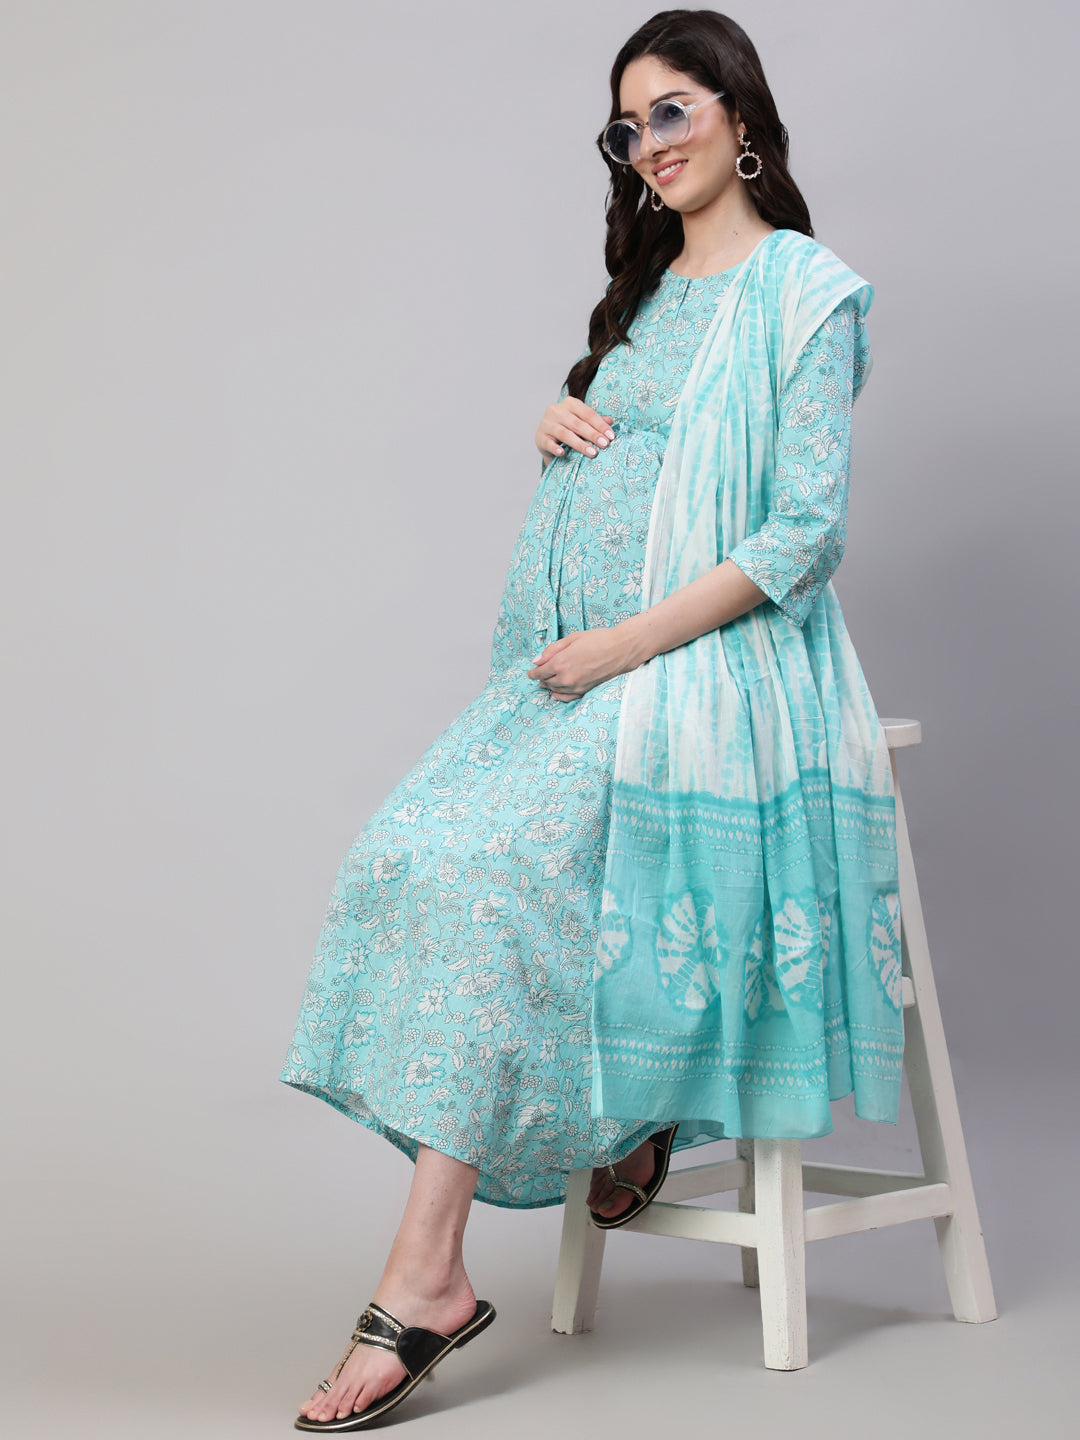 Women's Blue Floral Printed Flared Maternity Dress with Dupatta - Nayo Clothing